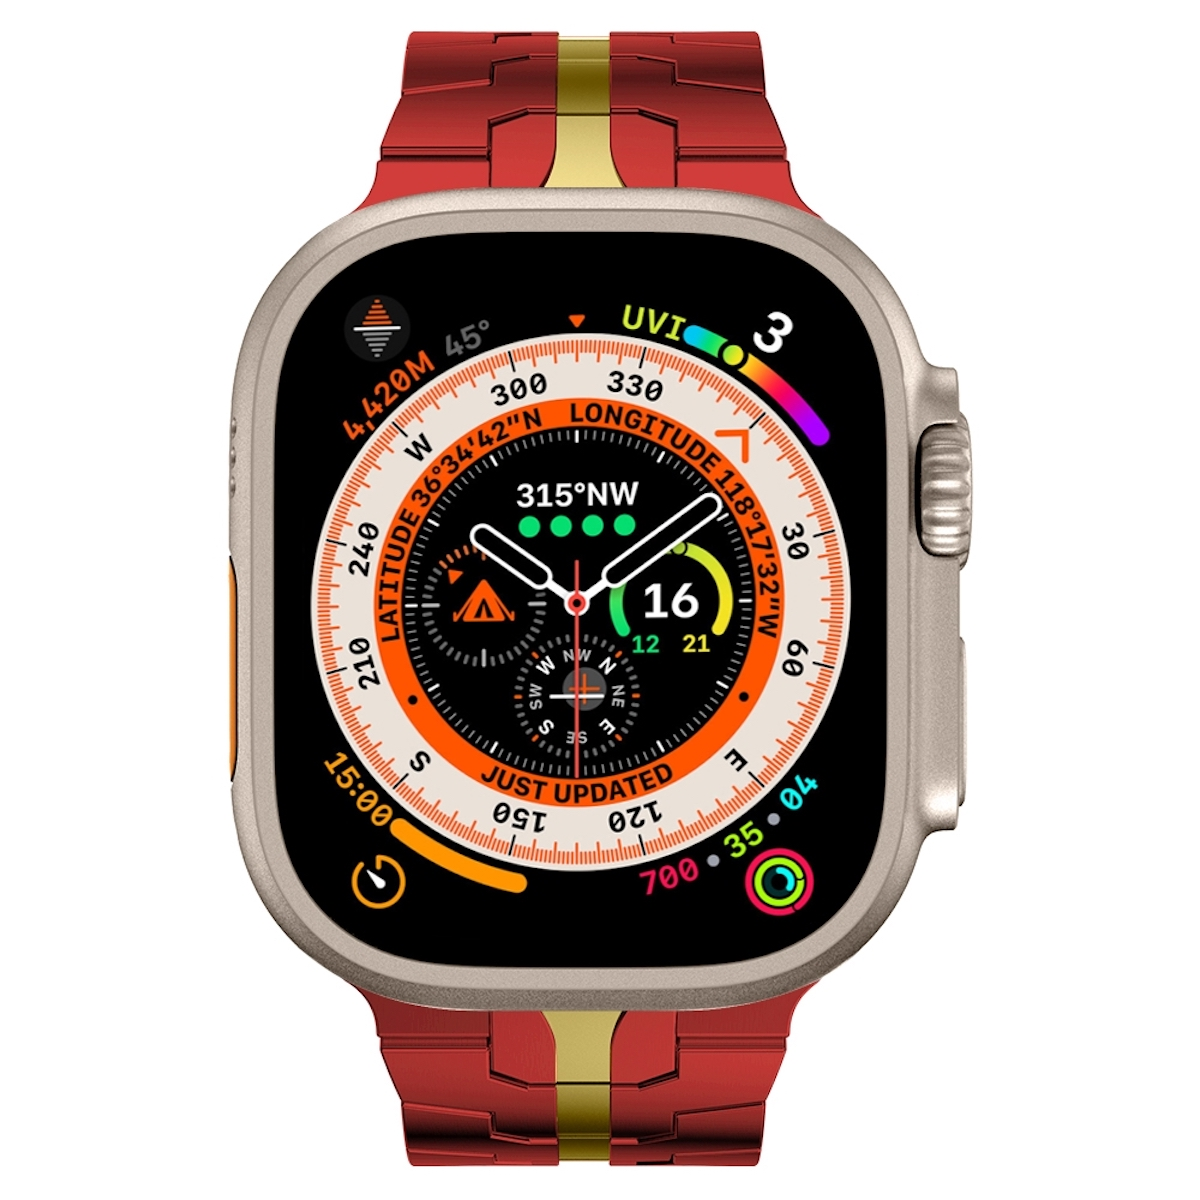 9 / Stahl 2 44 Series Ersatzarmband, 3 49mm Ultra Band, 2 WIGENTO 1 42mm, Gold 4 45 / Deluxe 1 6 5 7 Rot 8 + SE Watch / Apple,